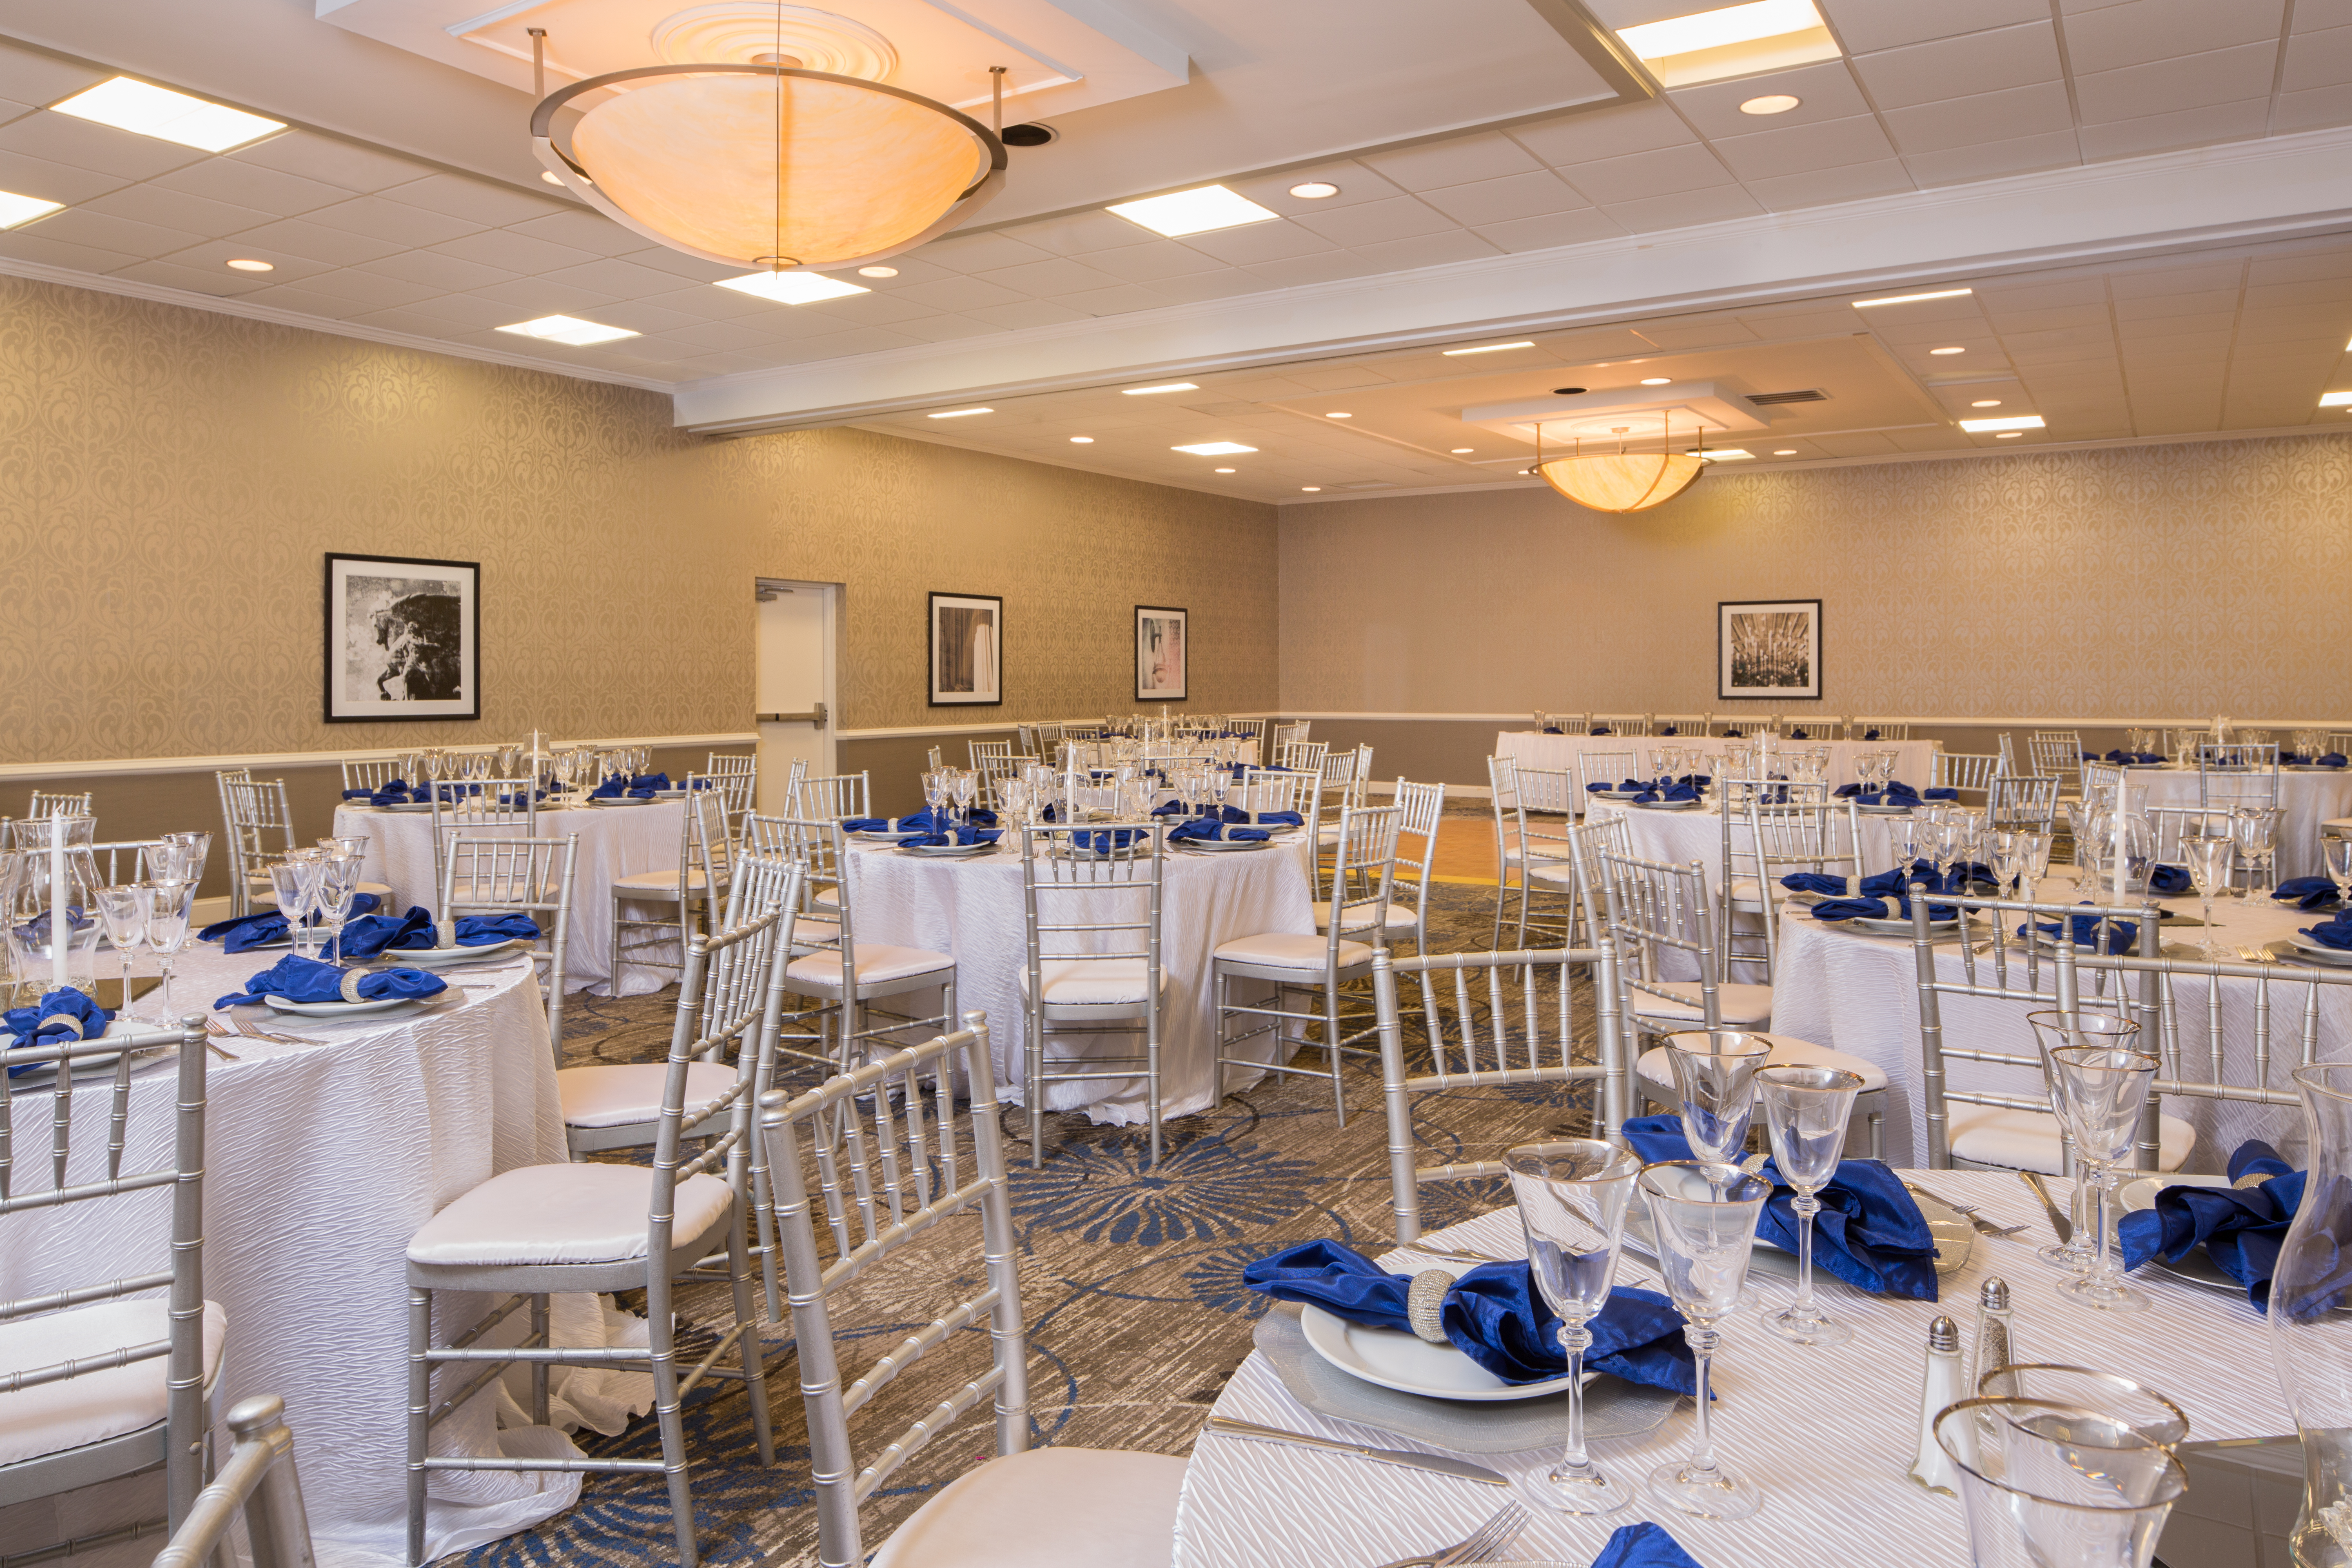 Banquet Setup in Meeting Room With Place Settings and Blue Napkins on Round Tables With White Linens Set Up for a Wedding